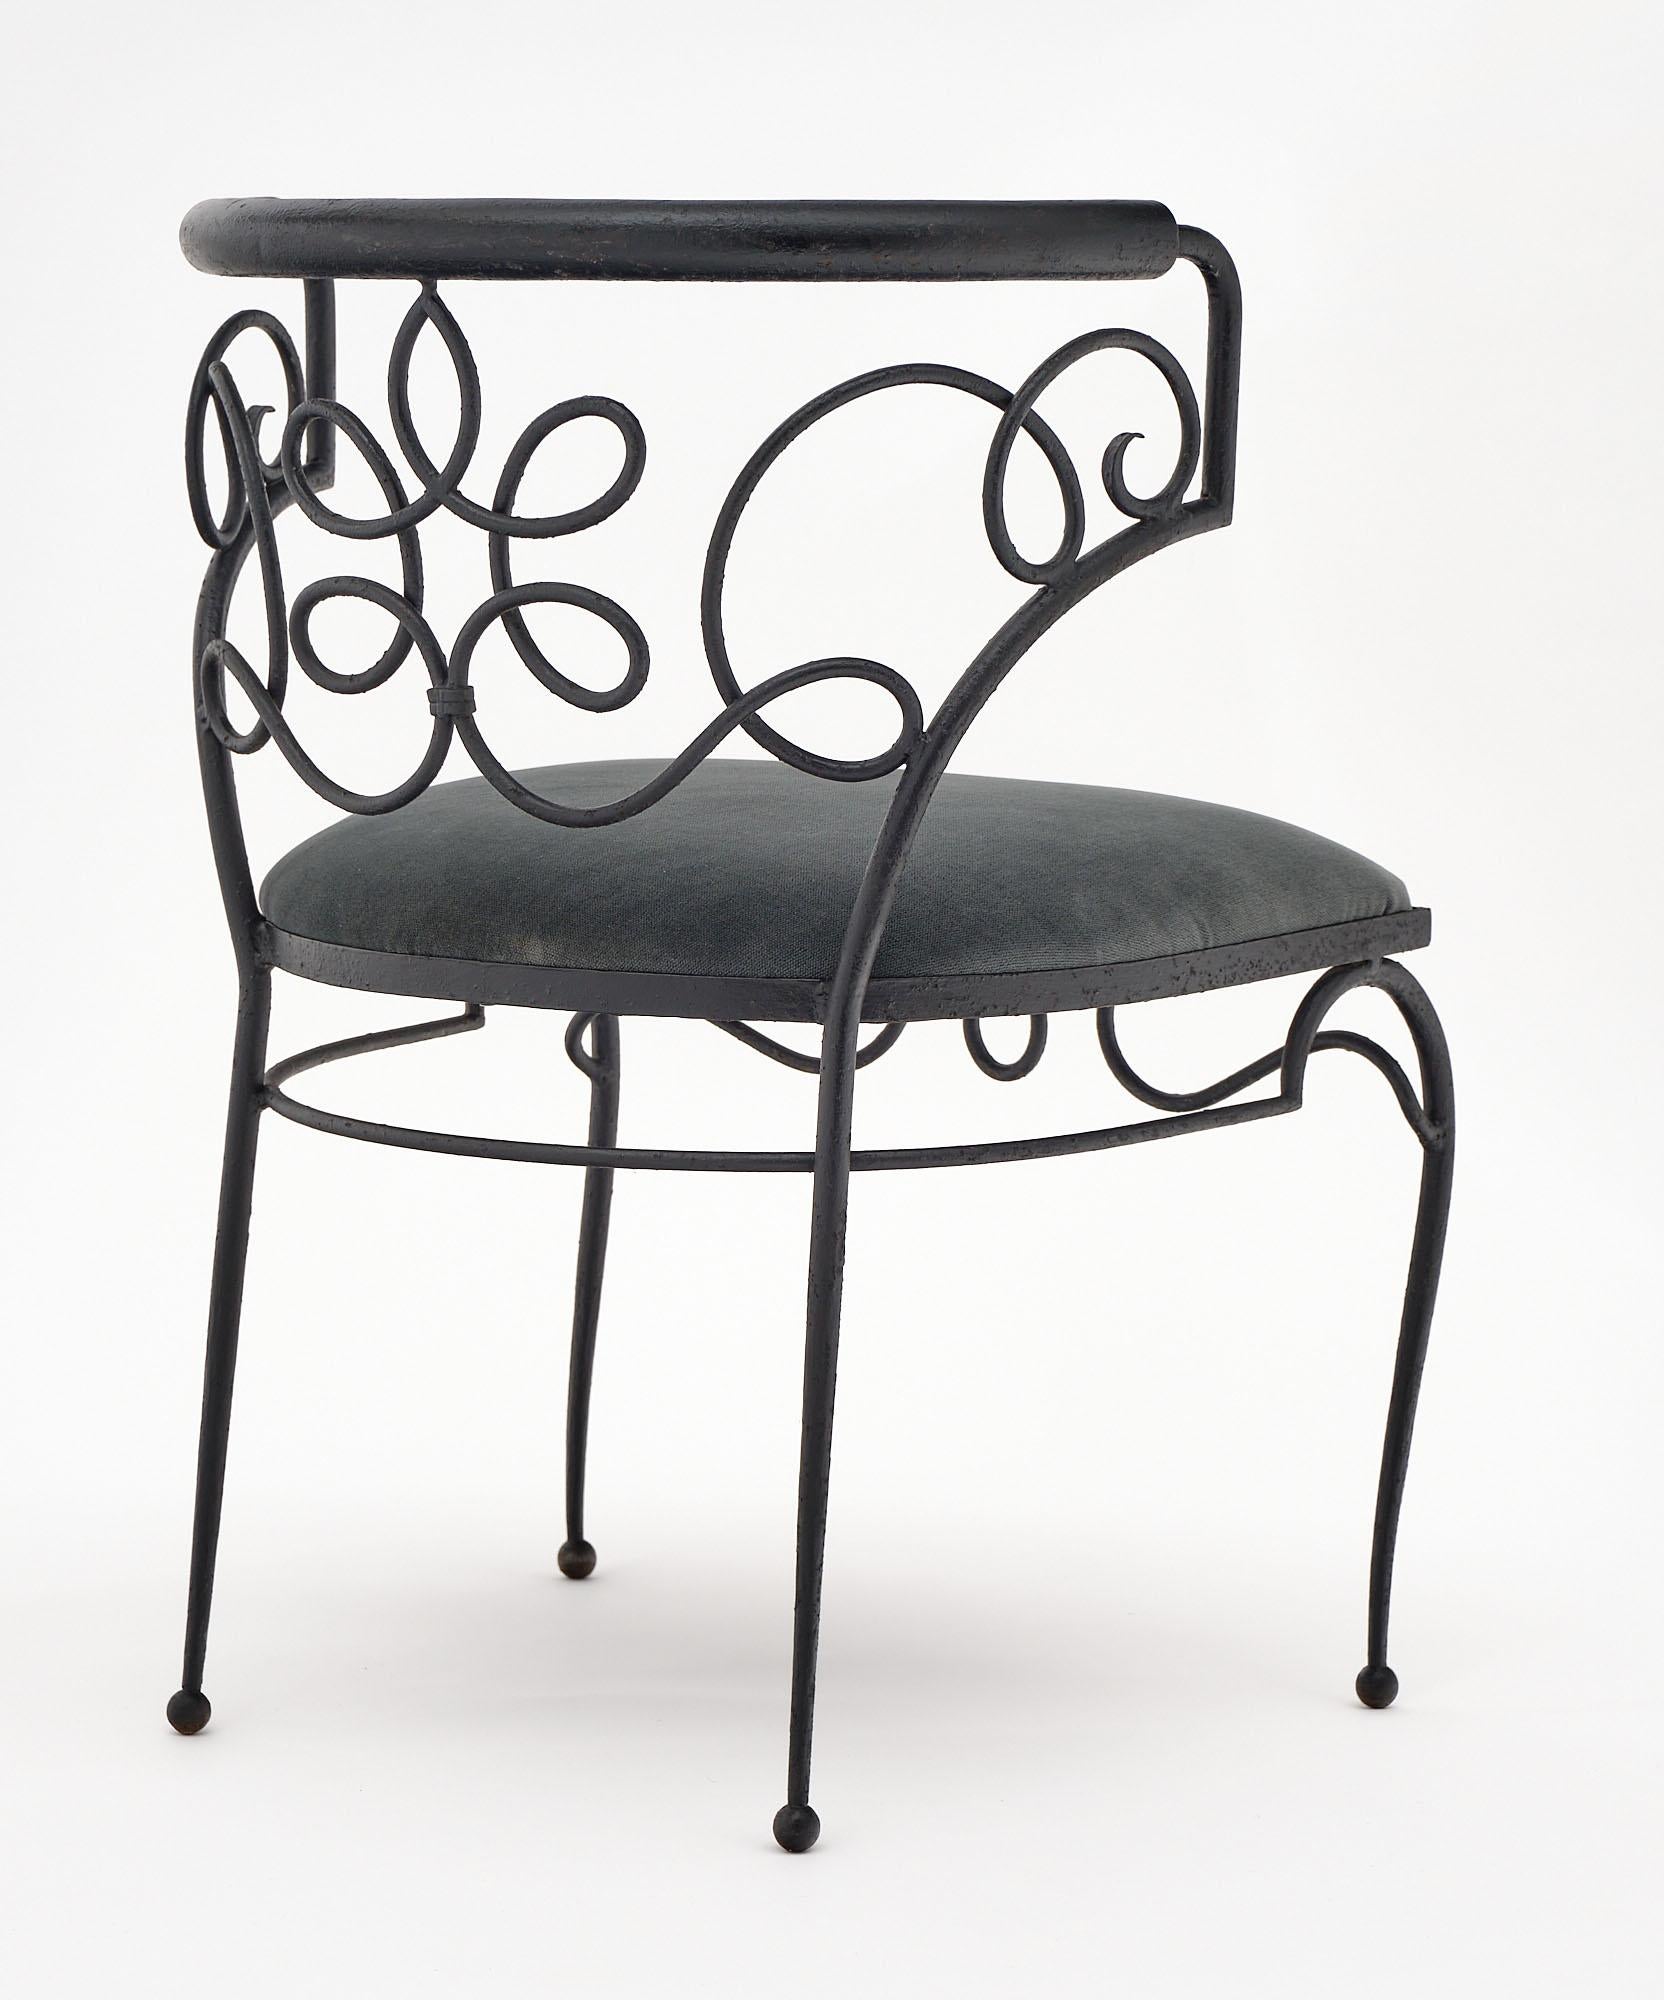 Pair of Iron Chairs by René Drouet 1